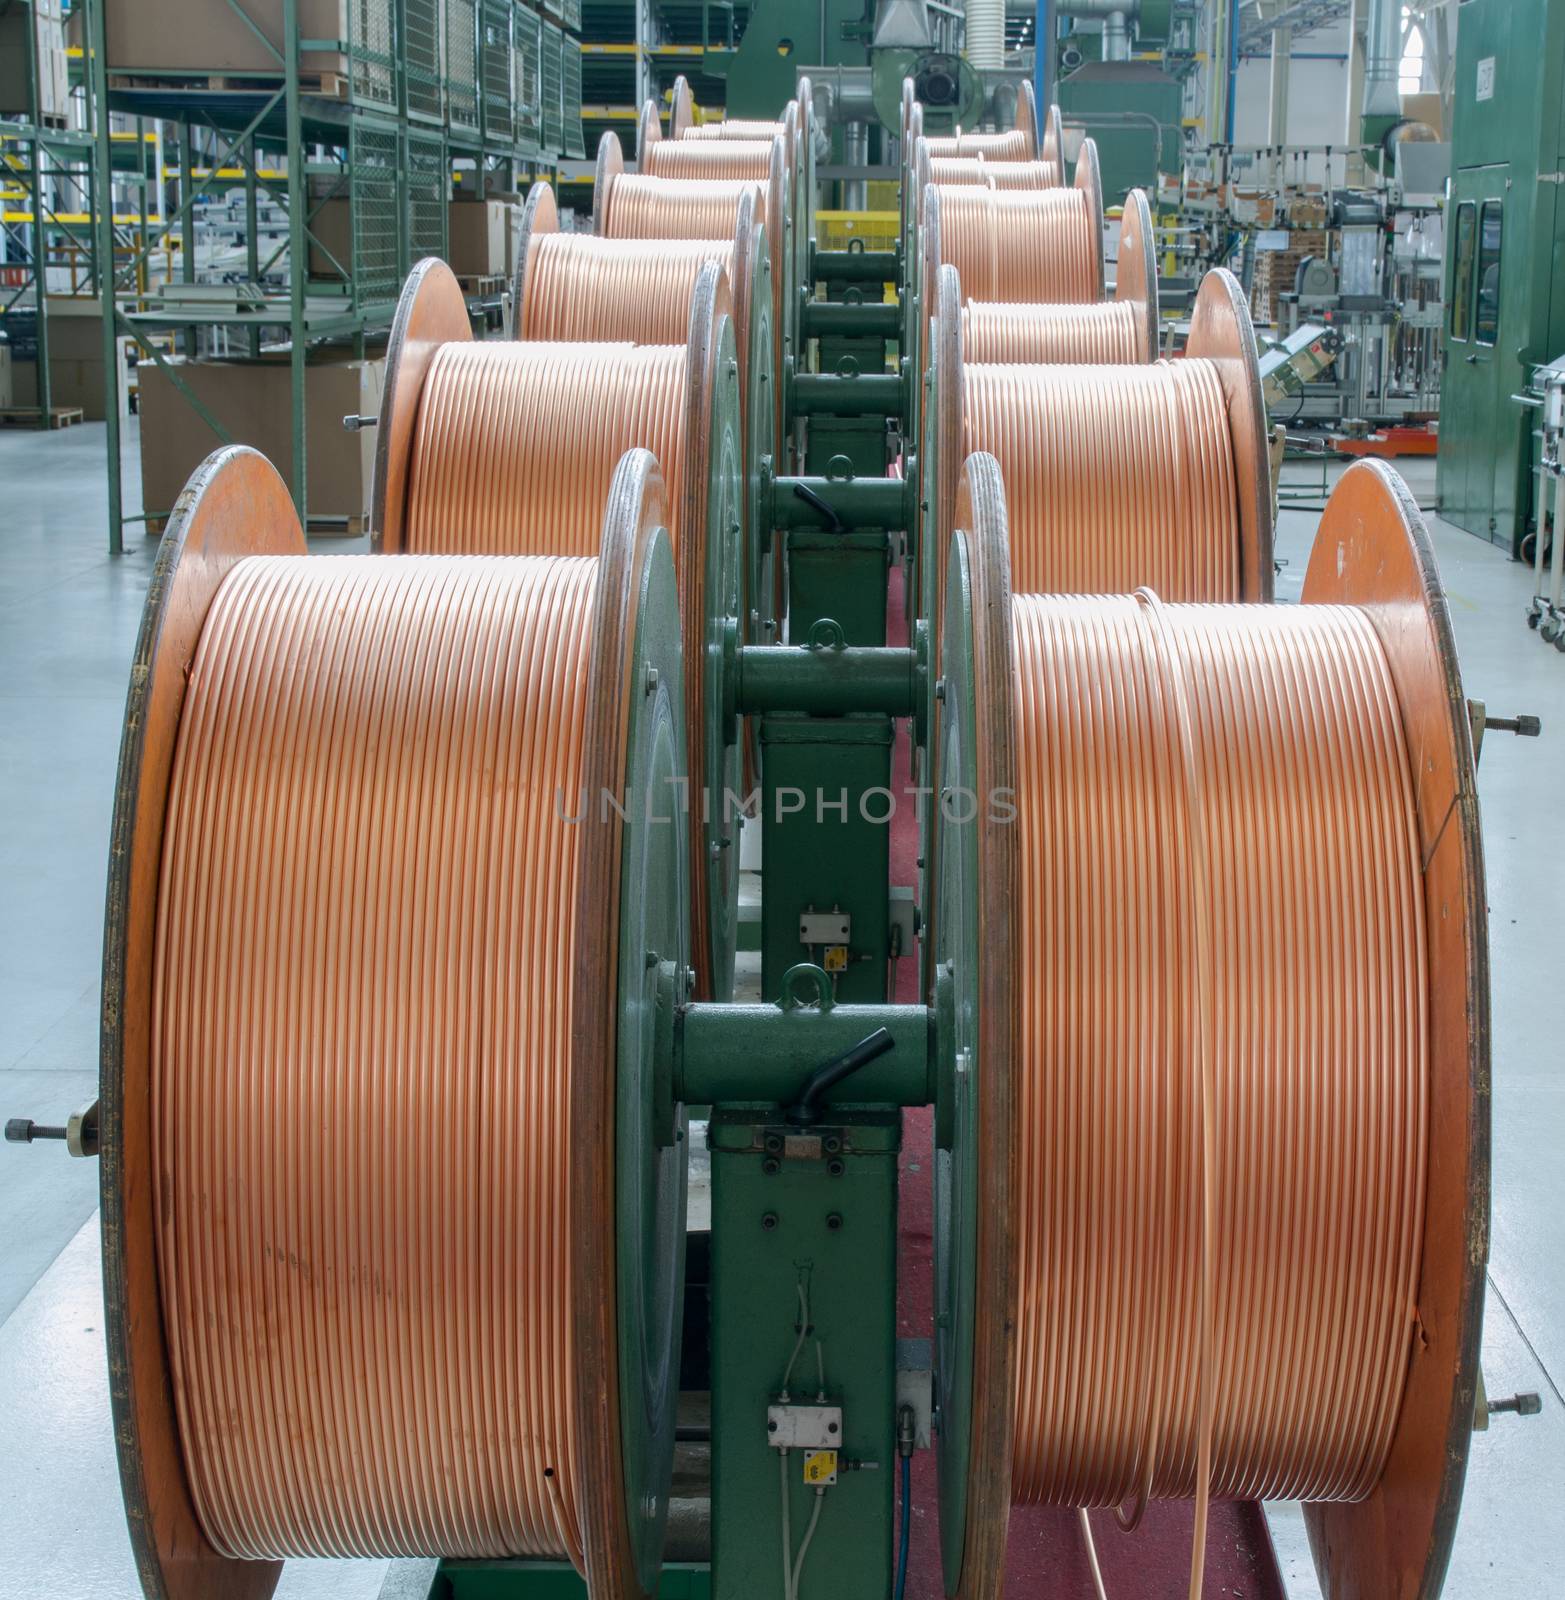 copper tubes for bending machine